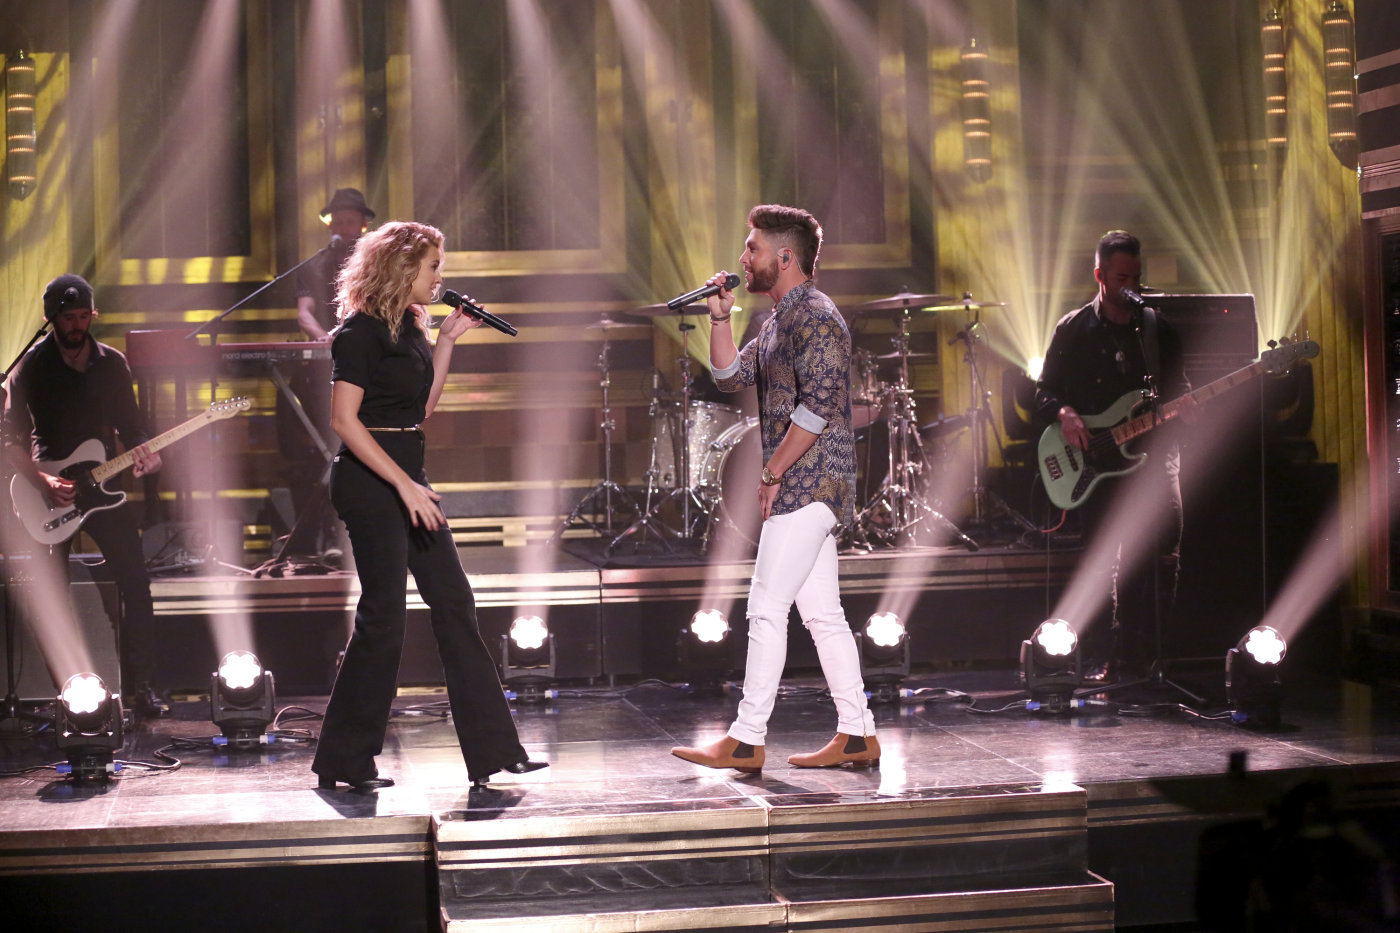 WATCH: Chris Lane and Tori Kelly Perform “Take Back Home Girl” on The Tonight Show